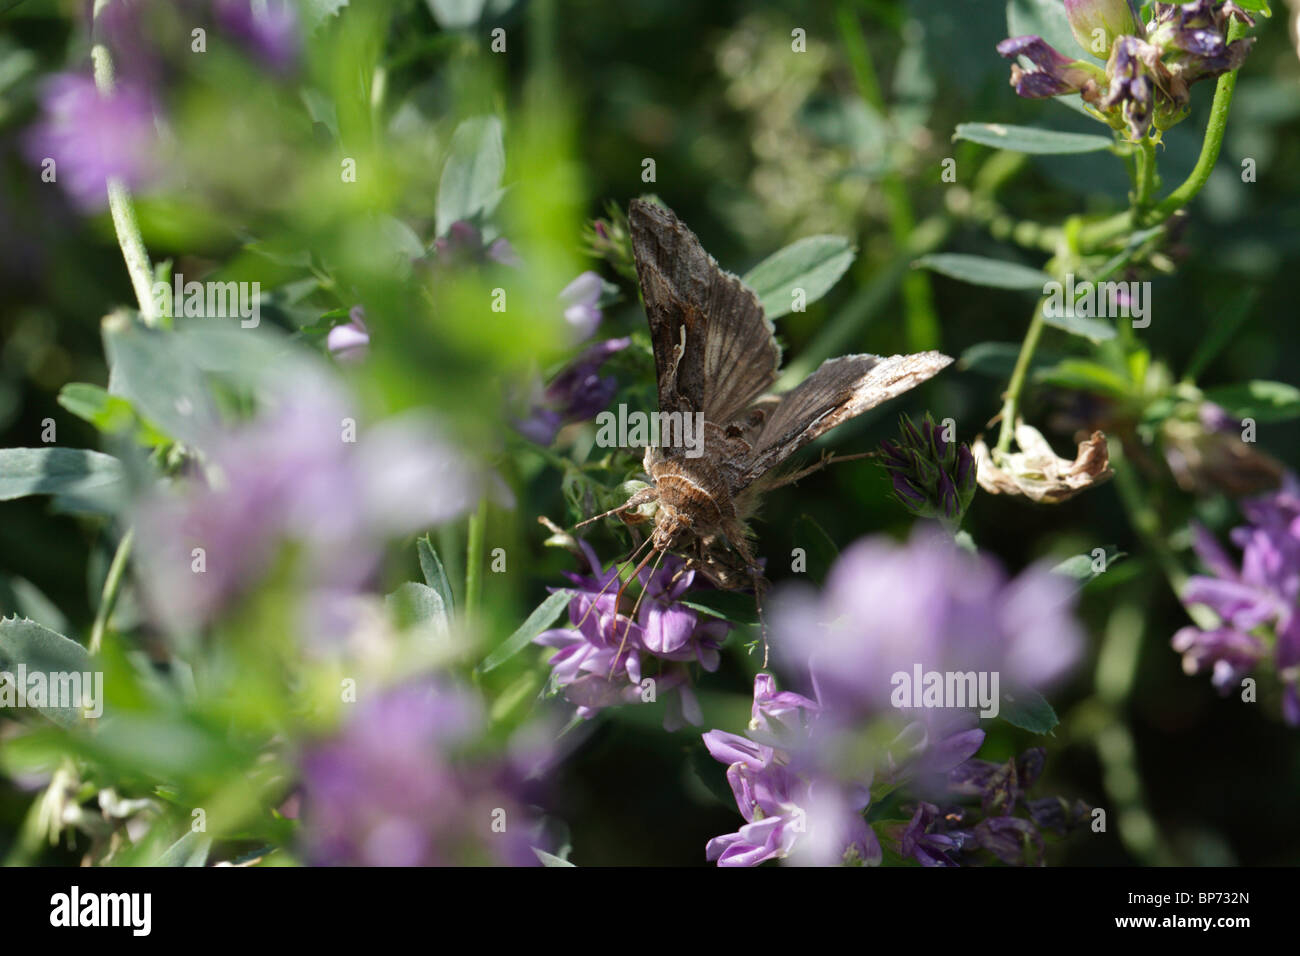 Autographa gamma, Silver Y butterfly Stock Photo